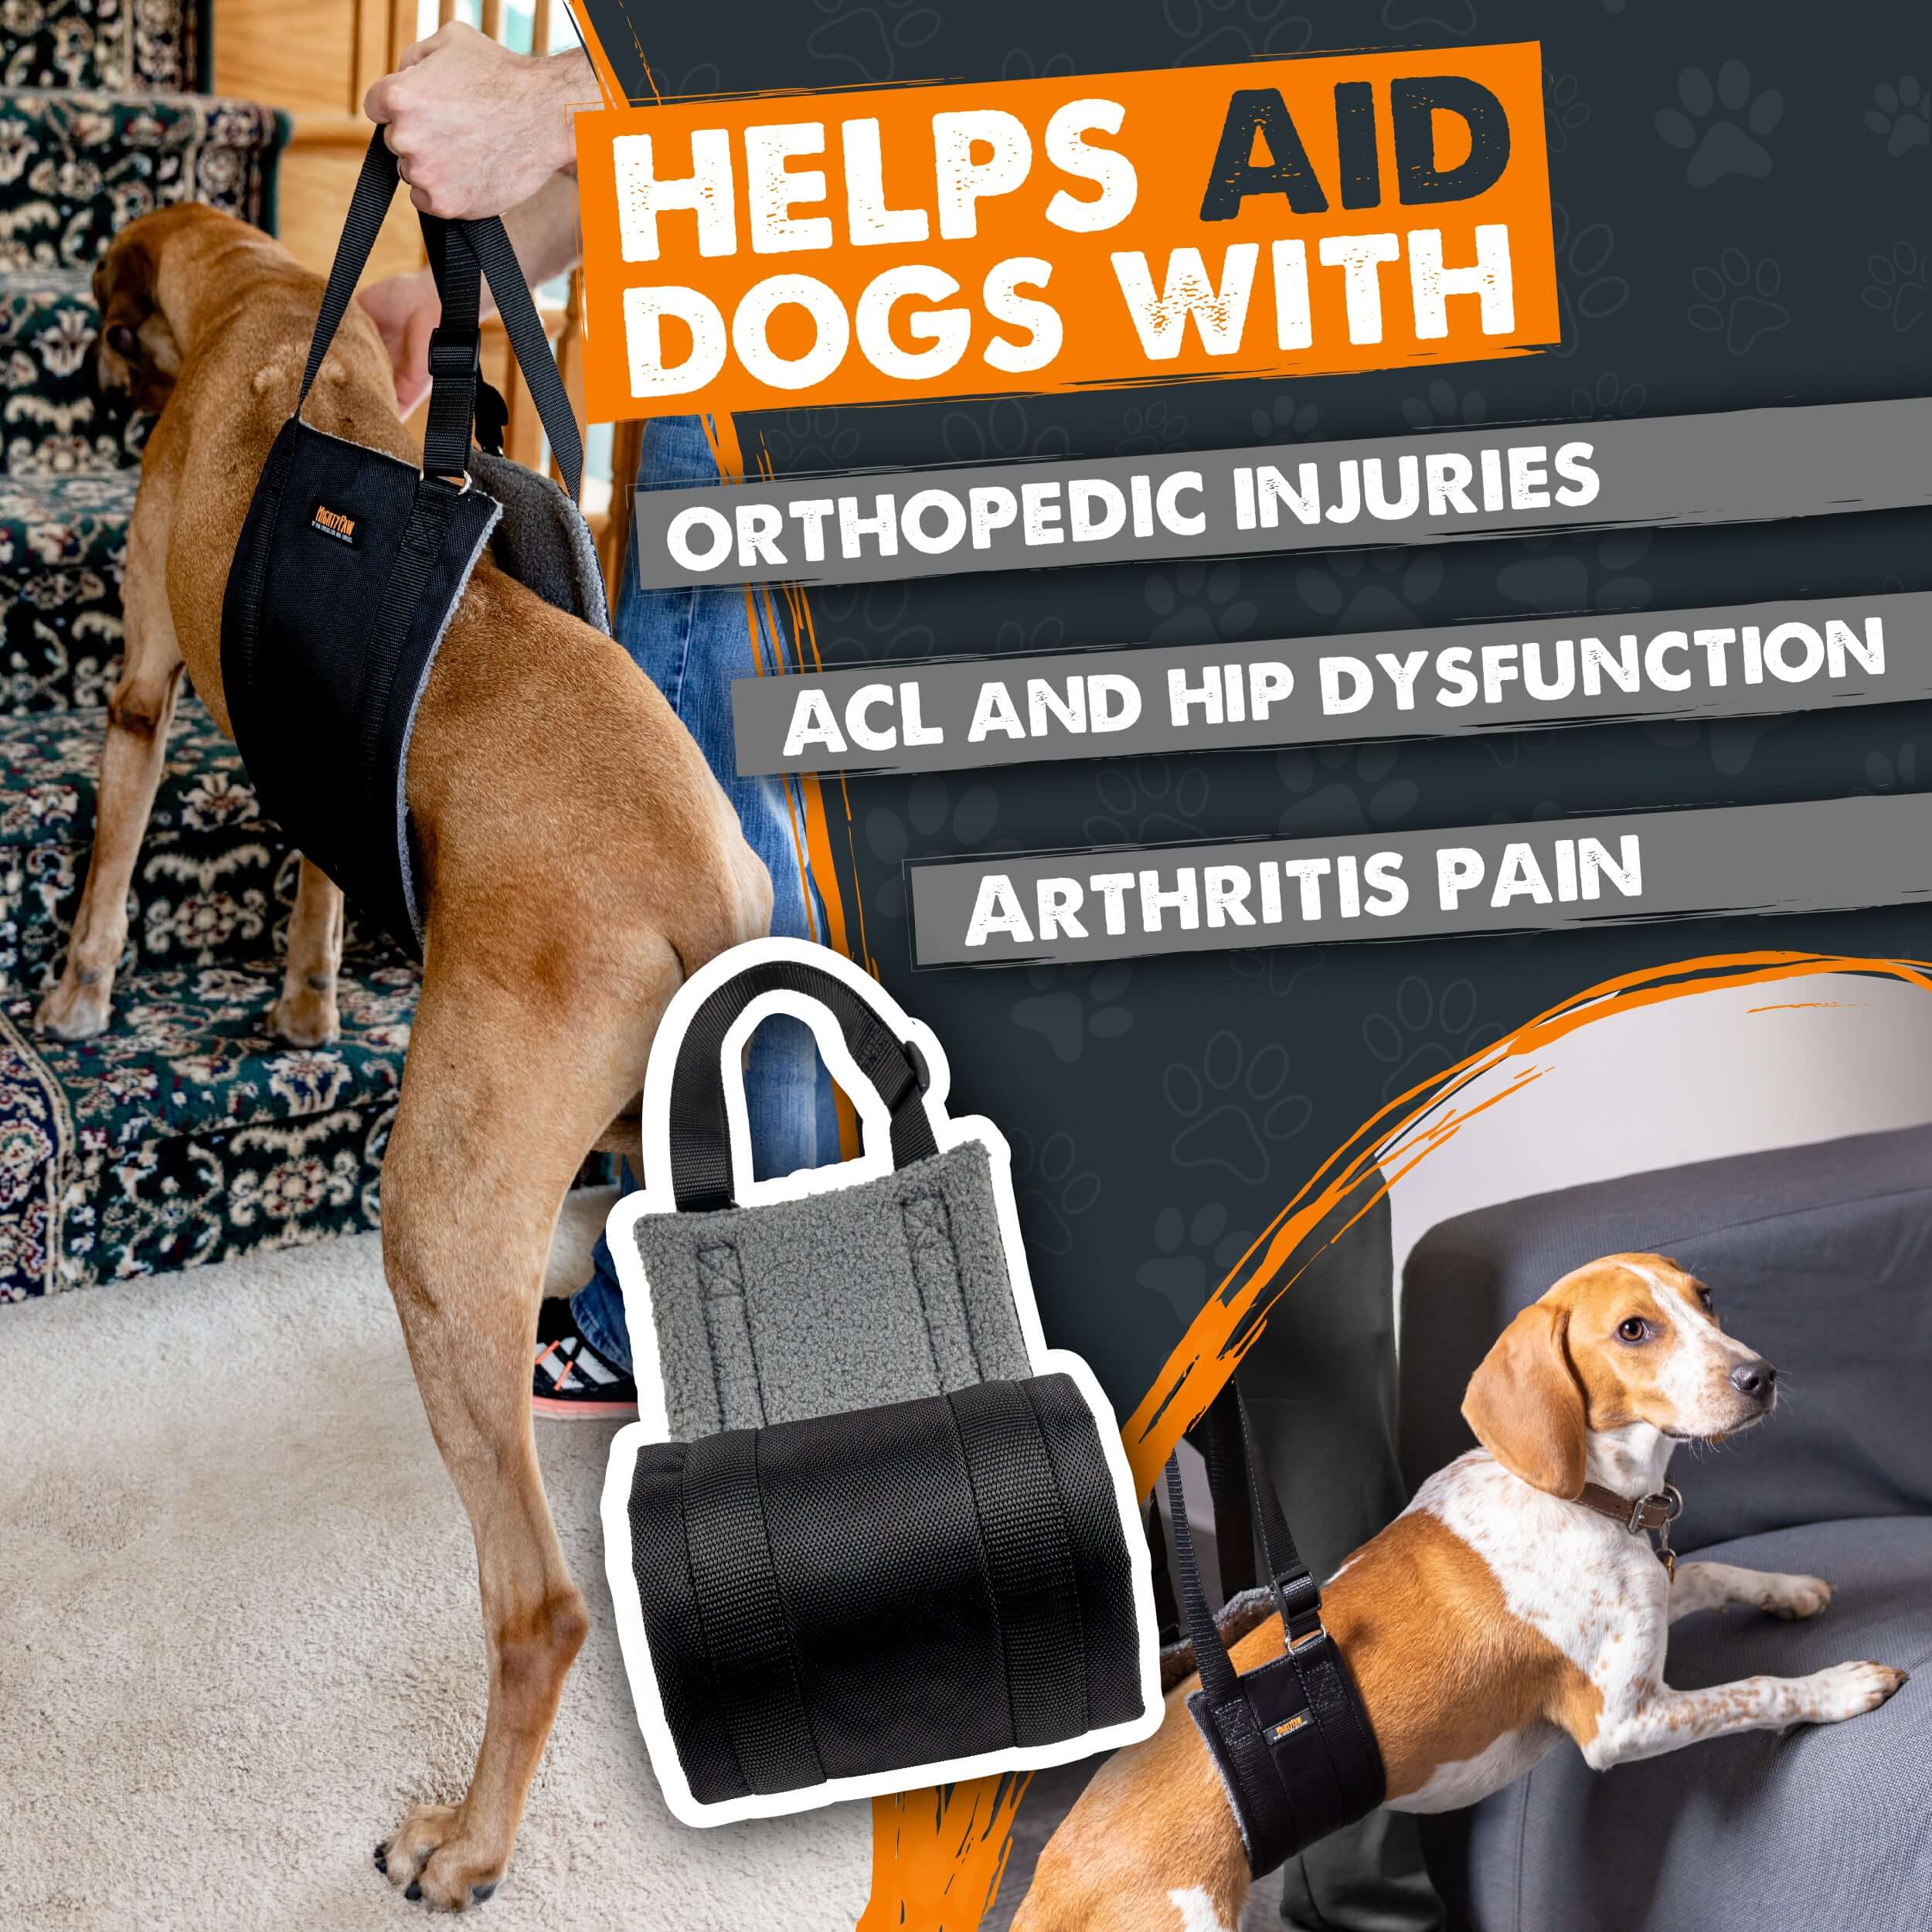 Mighty Paw Dog Lift Harness